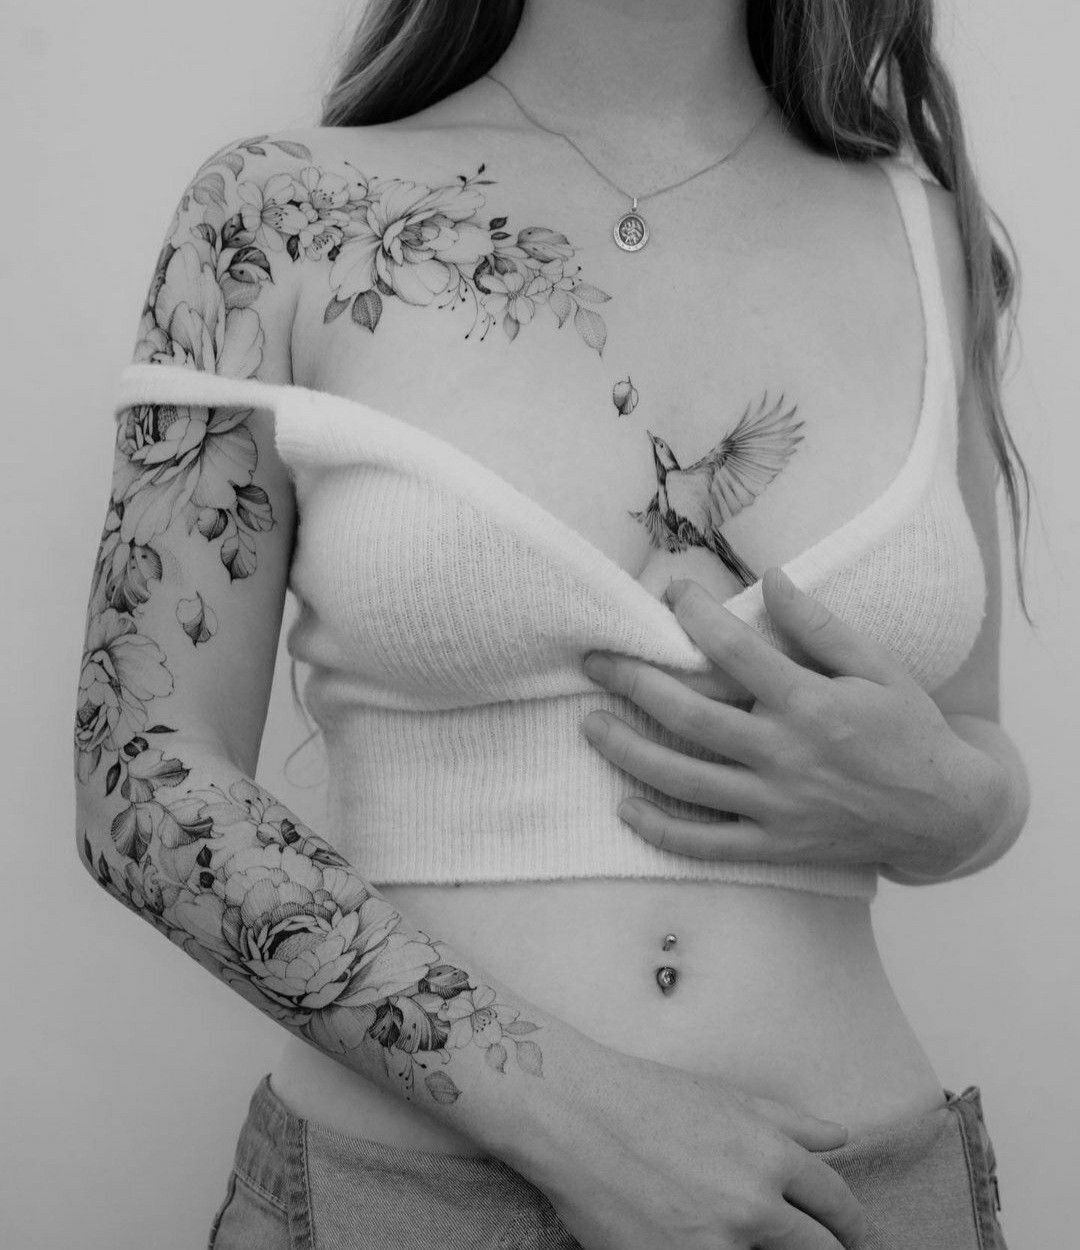 i wanted to do this sternum tattoo but i heard its painful and now im  just scared  what do you think  rTattooDesigns